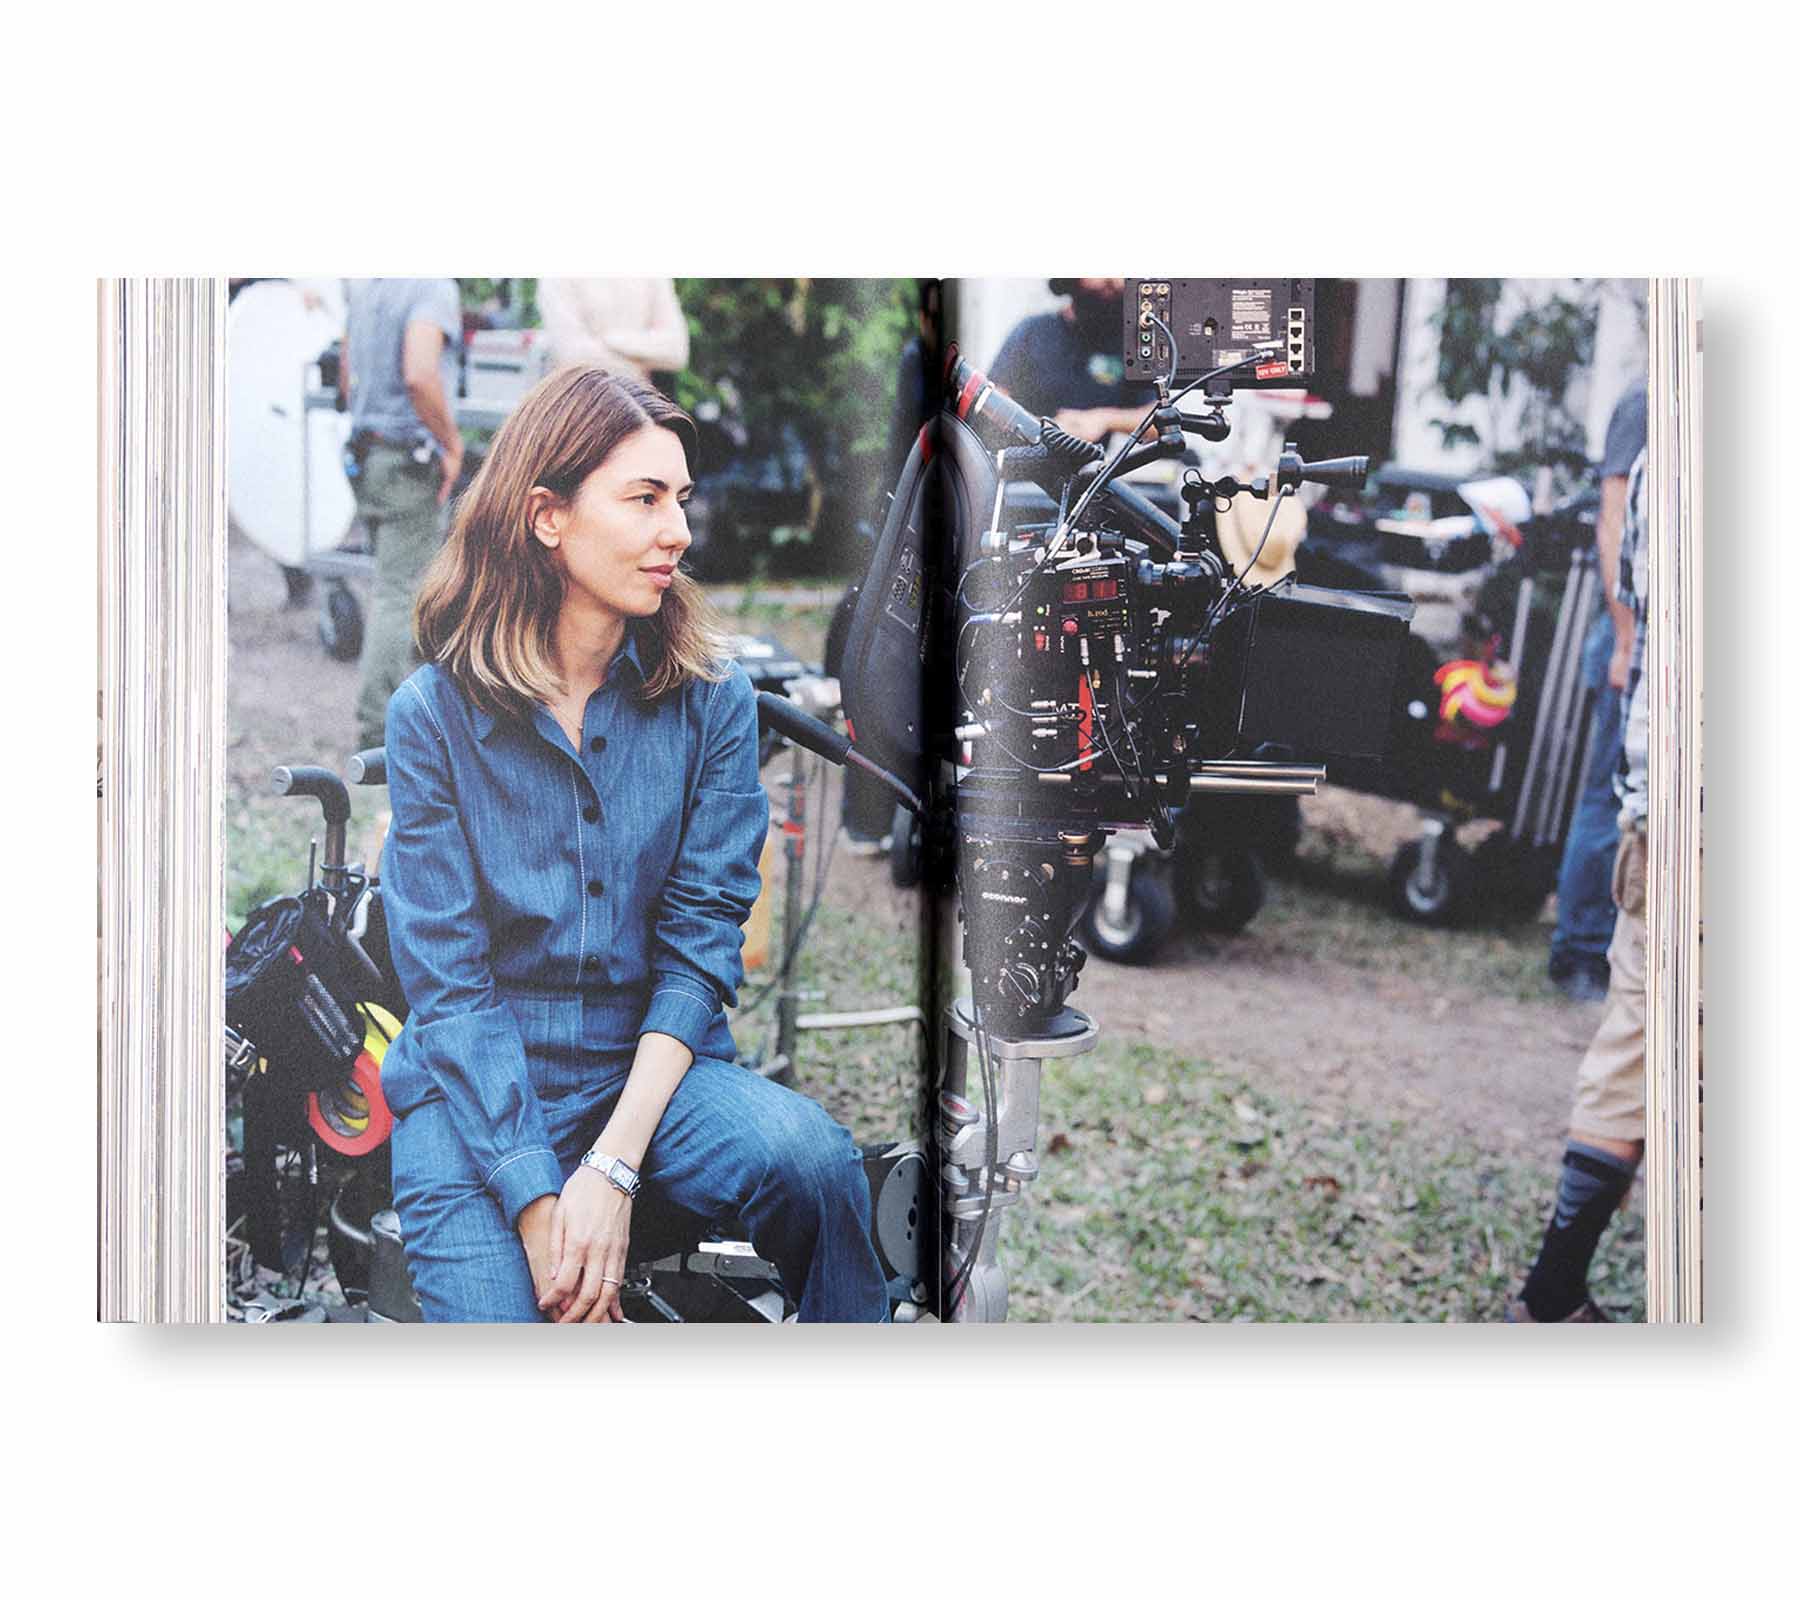 ARCHIVE by Sofia Coppola [SPECIAL EDITION]